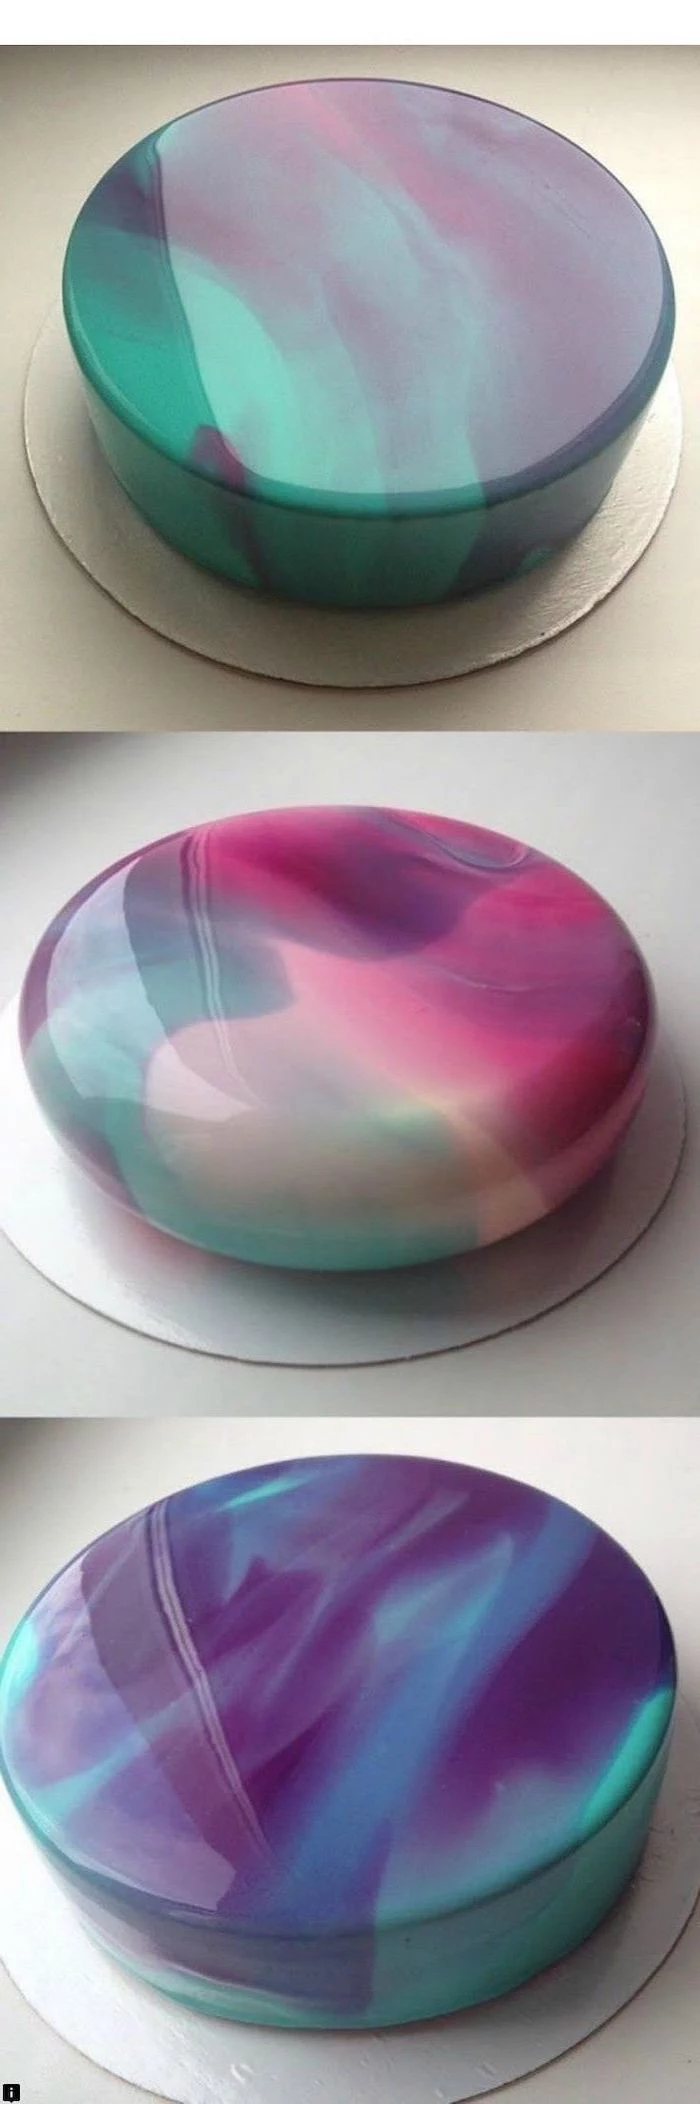 photo collage of three one tier cakes, covered with mirror glaze in different colors, galaxy mirror cake